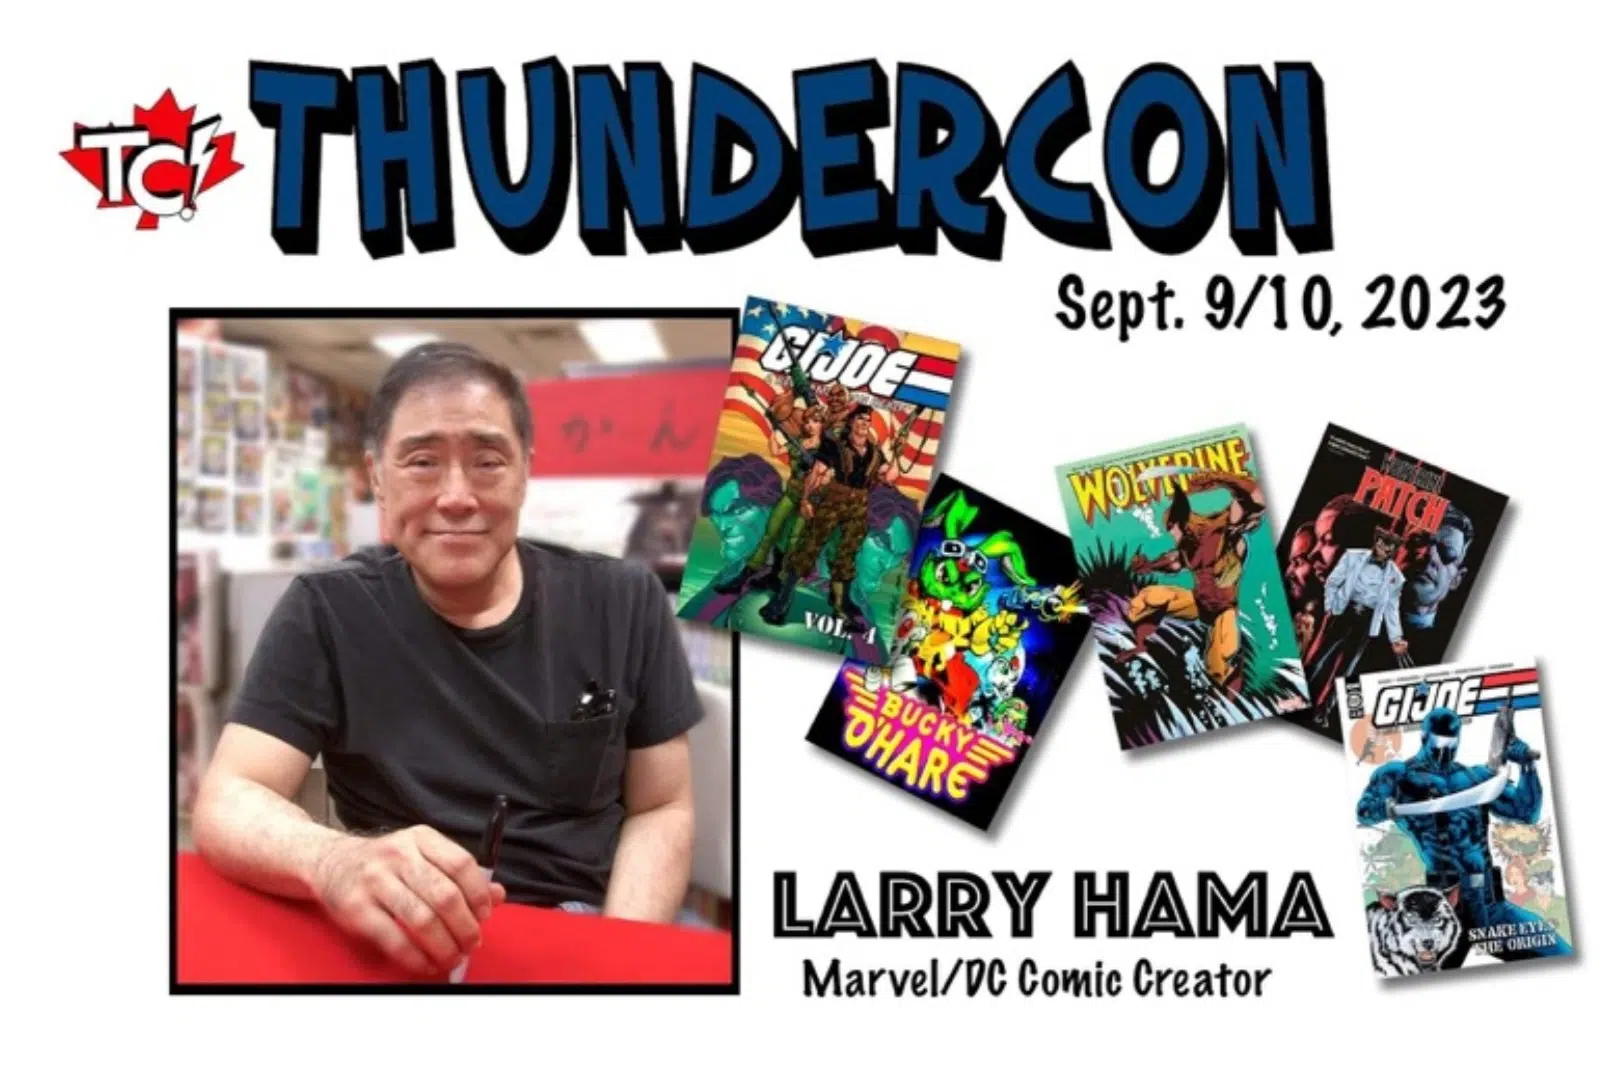 Thundercon announces its first guest